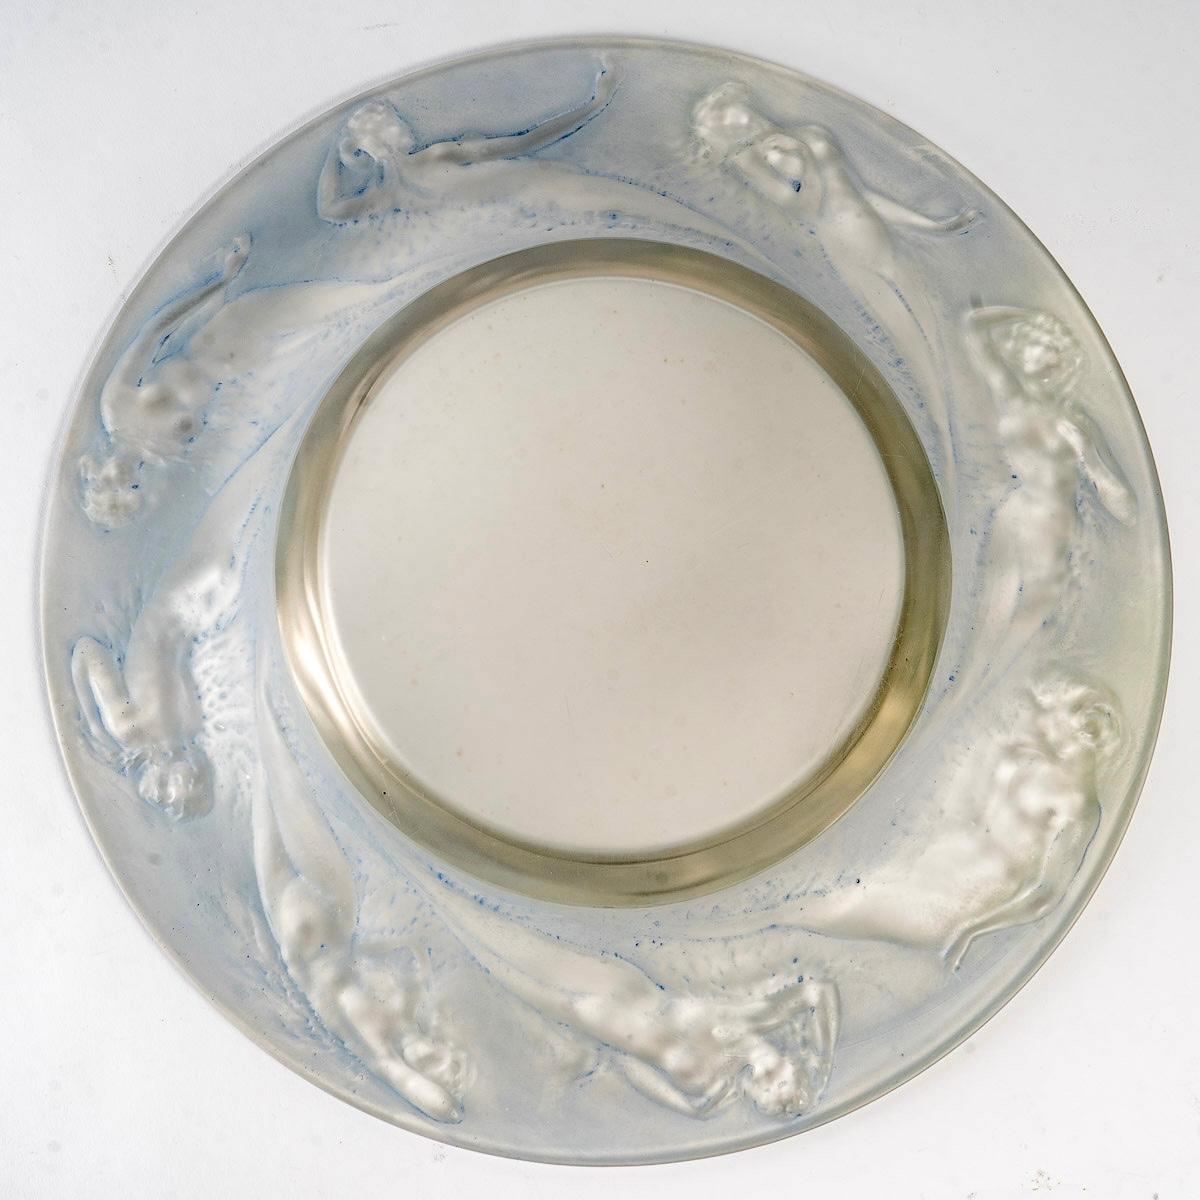 Molded 1920 René Lalique Sirenes Coupe Bowl Frosted Glass & Blue Patina, Mermaids